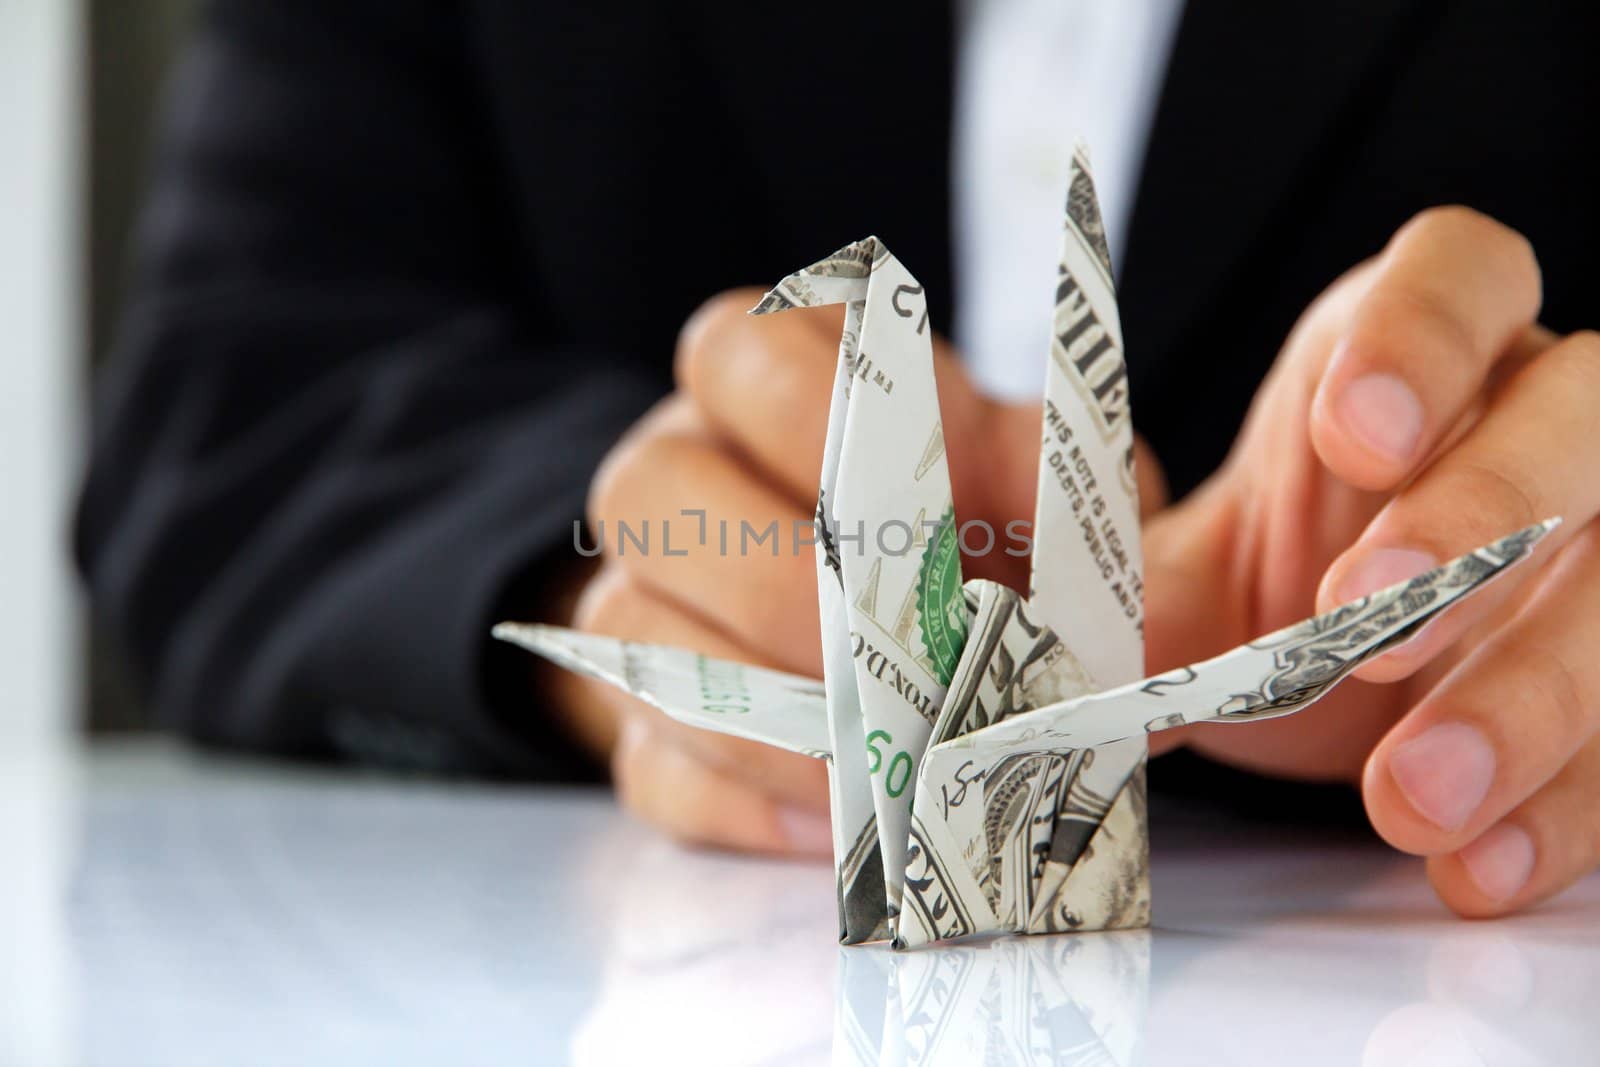 business man hand holding origami paper cranes, money concept